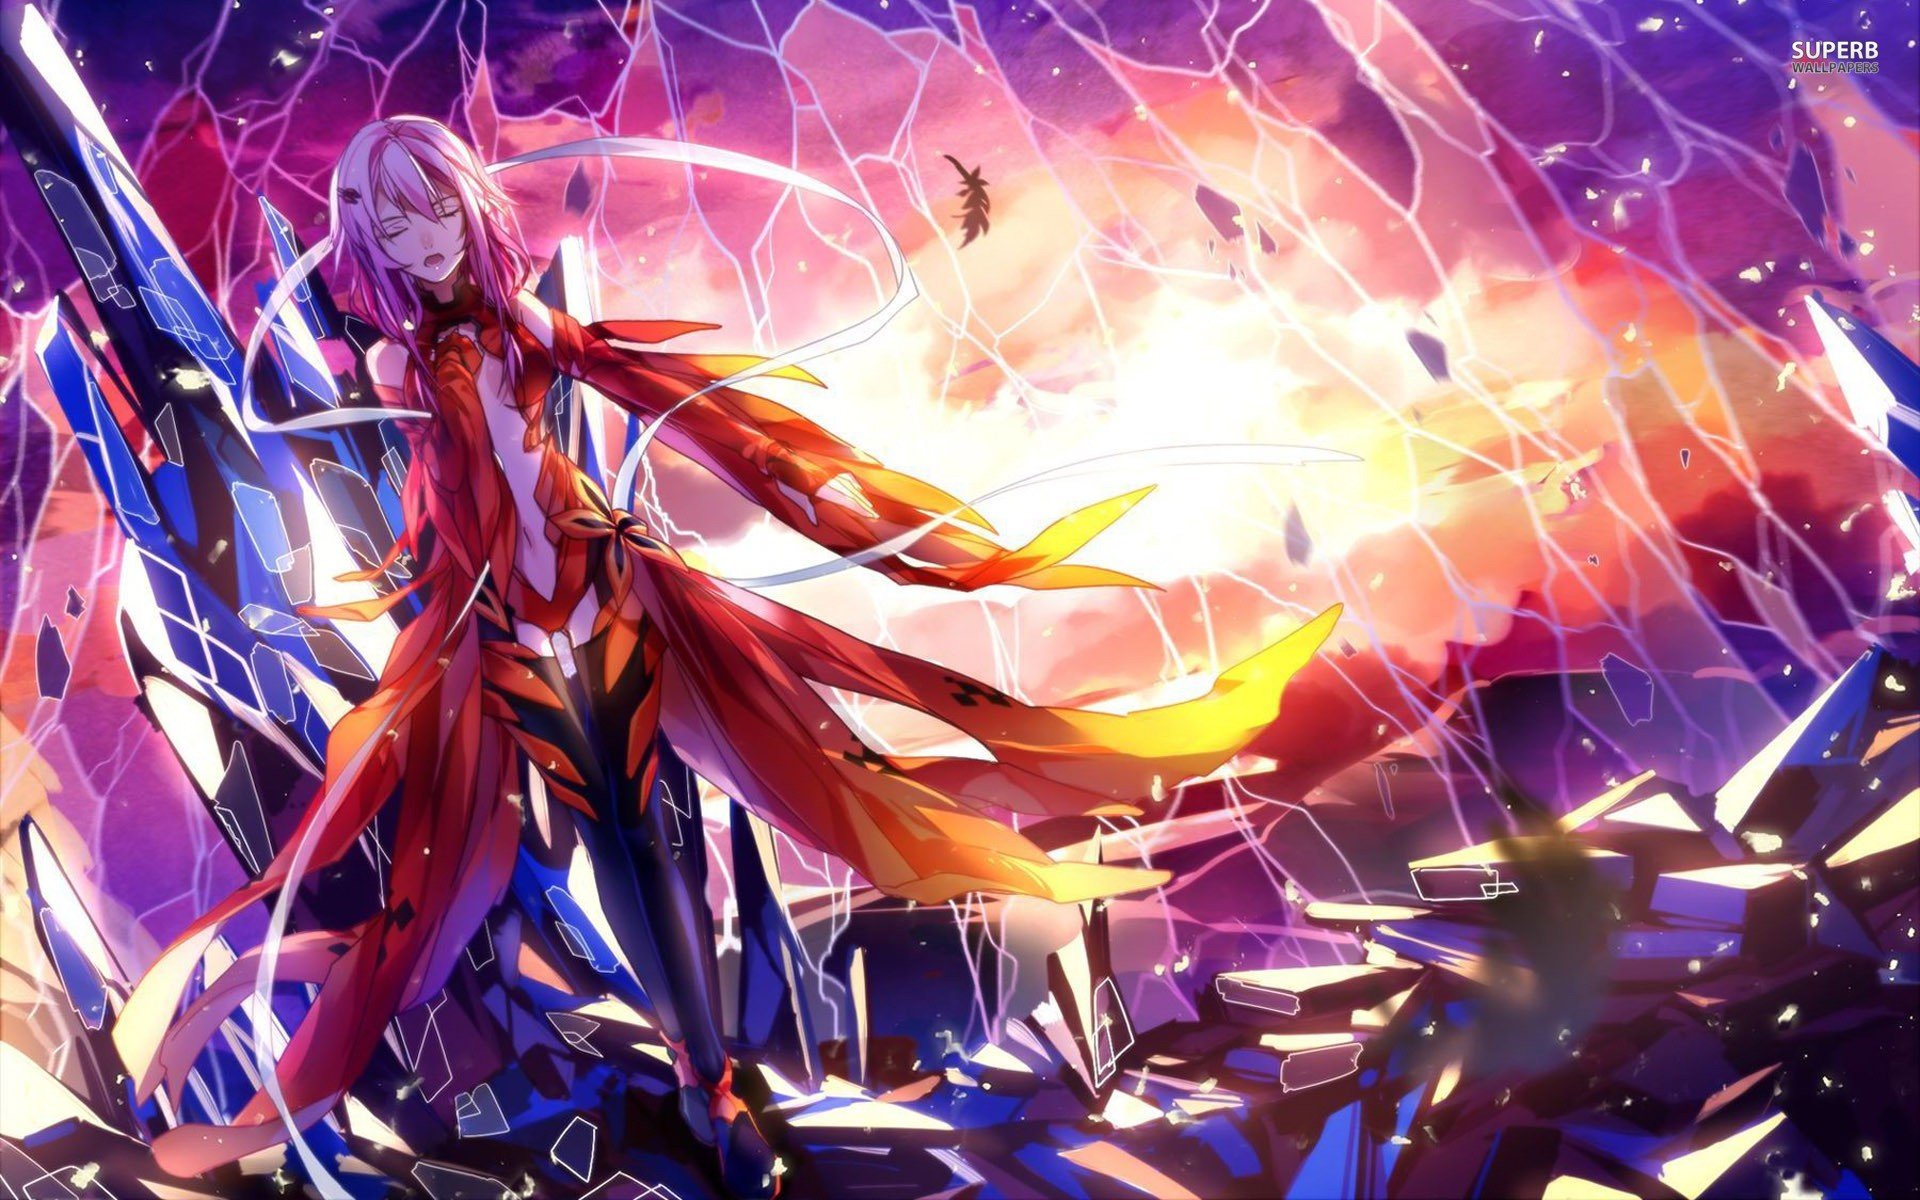 guilty crown 2 download free